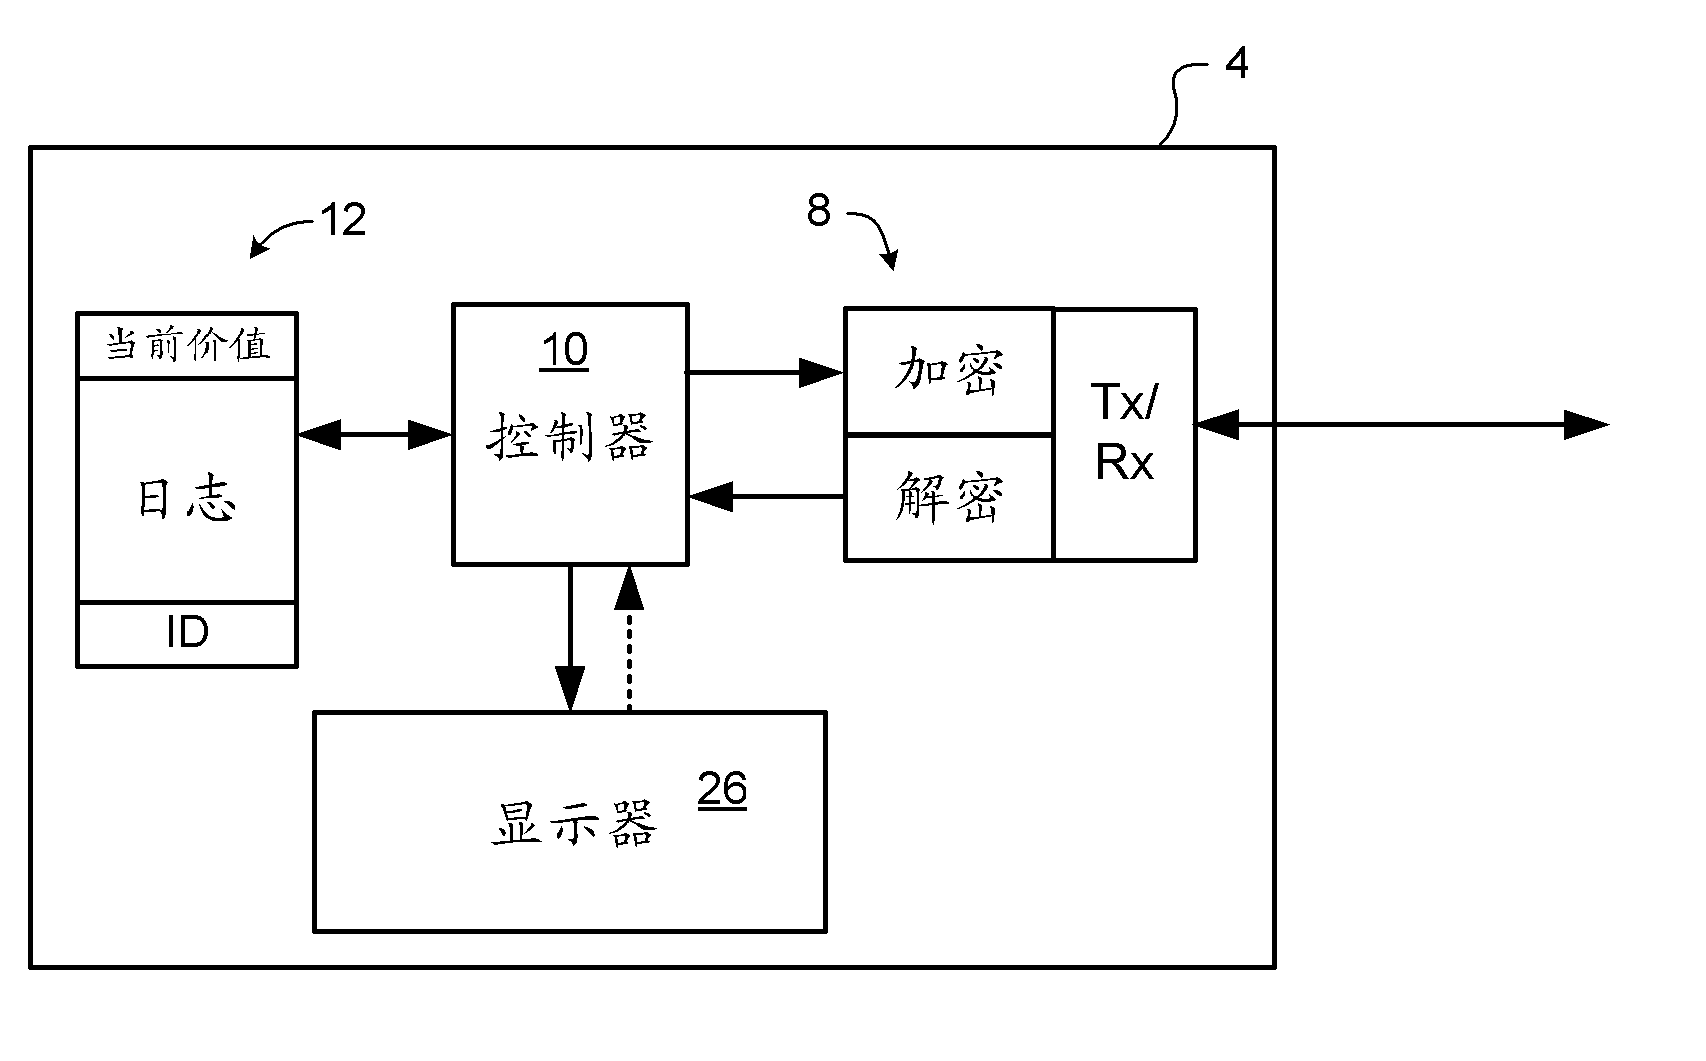 Asset storage and transfer system for electronic purses